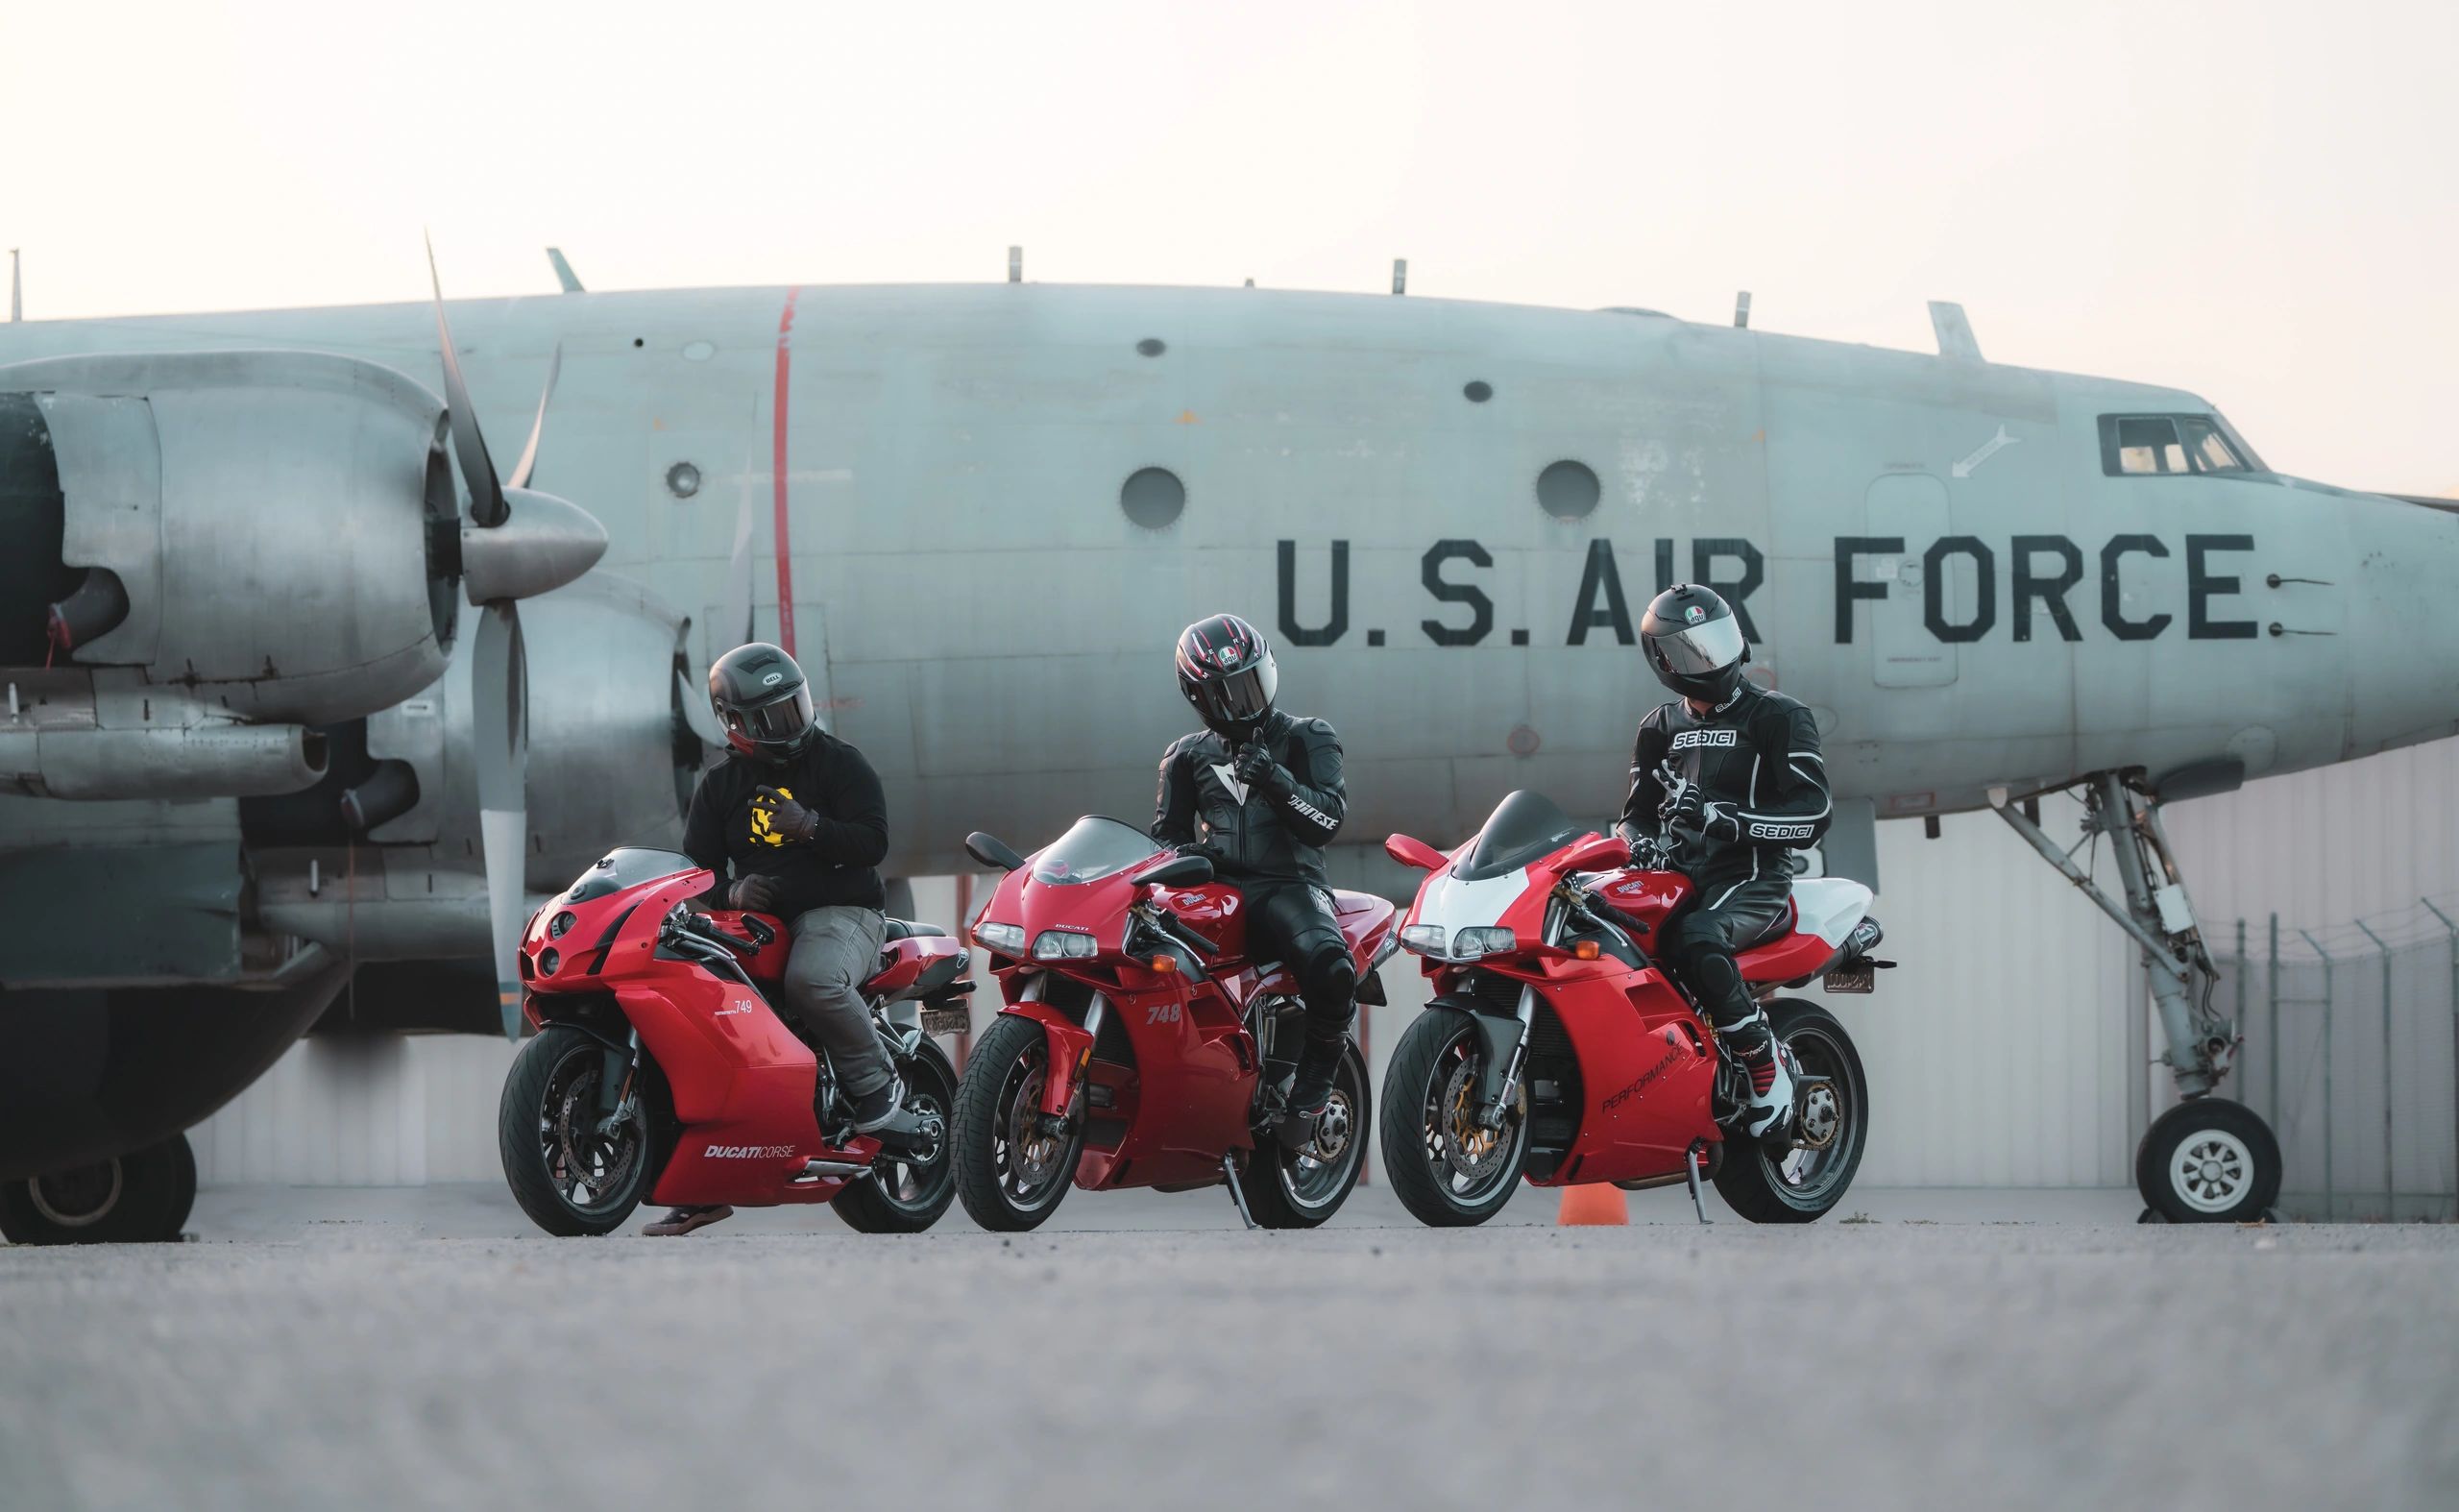 Men on Motorcycles all with red Ducatis US Aircraft in the background